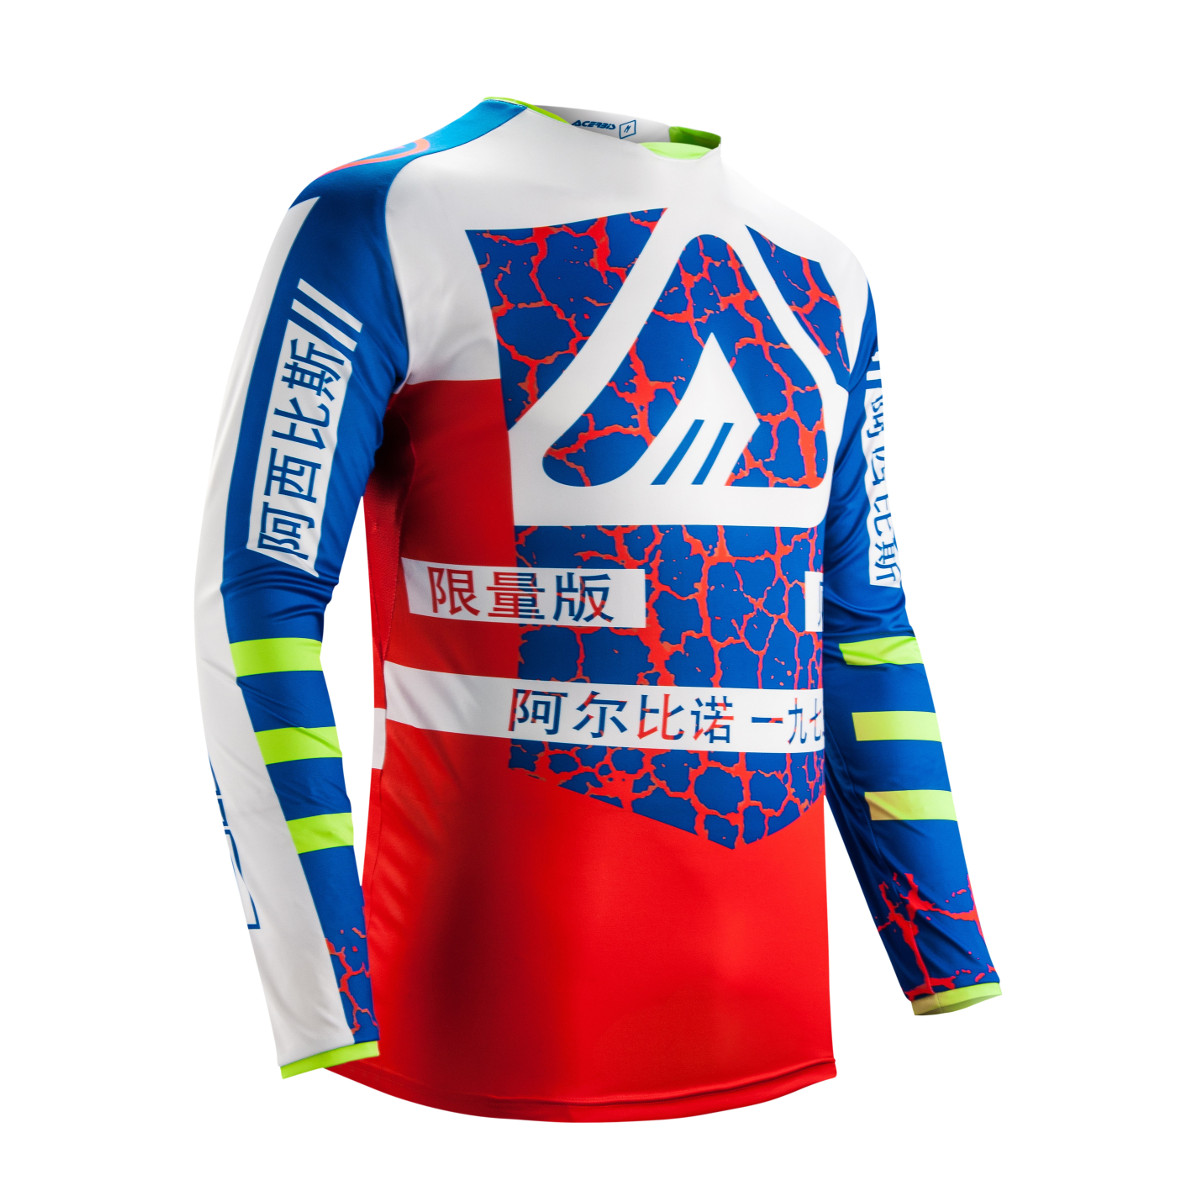 Acerbis Jersey Limited Edition Avenger - Rot/Blau